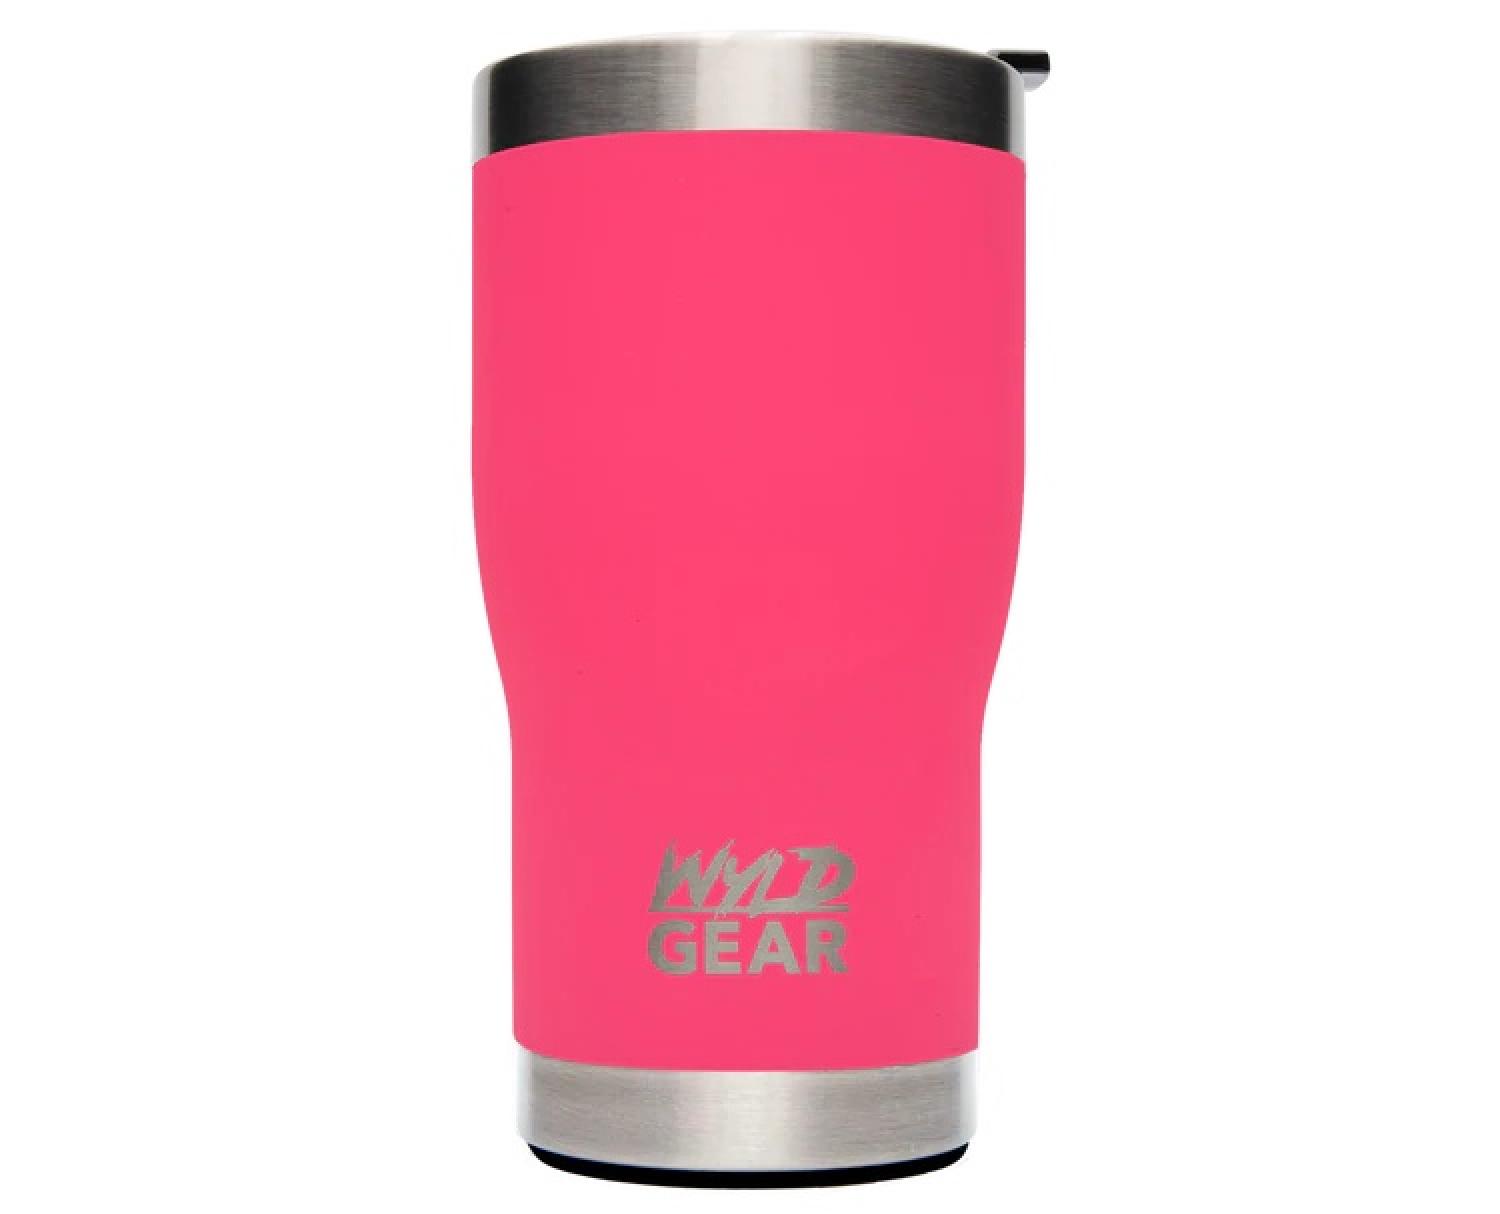 Wyld Gear Insulated Tumbler